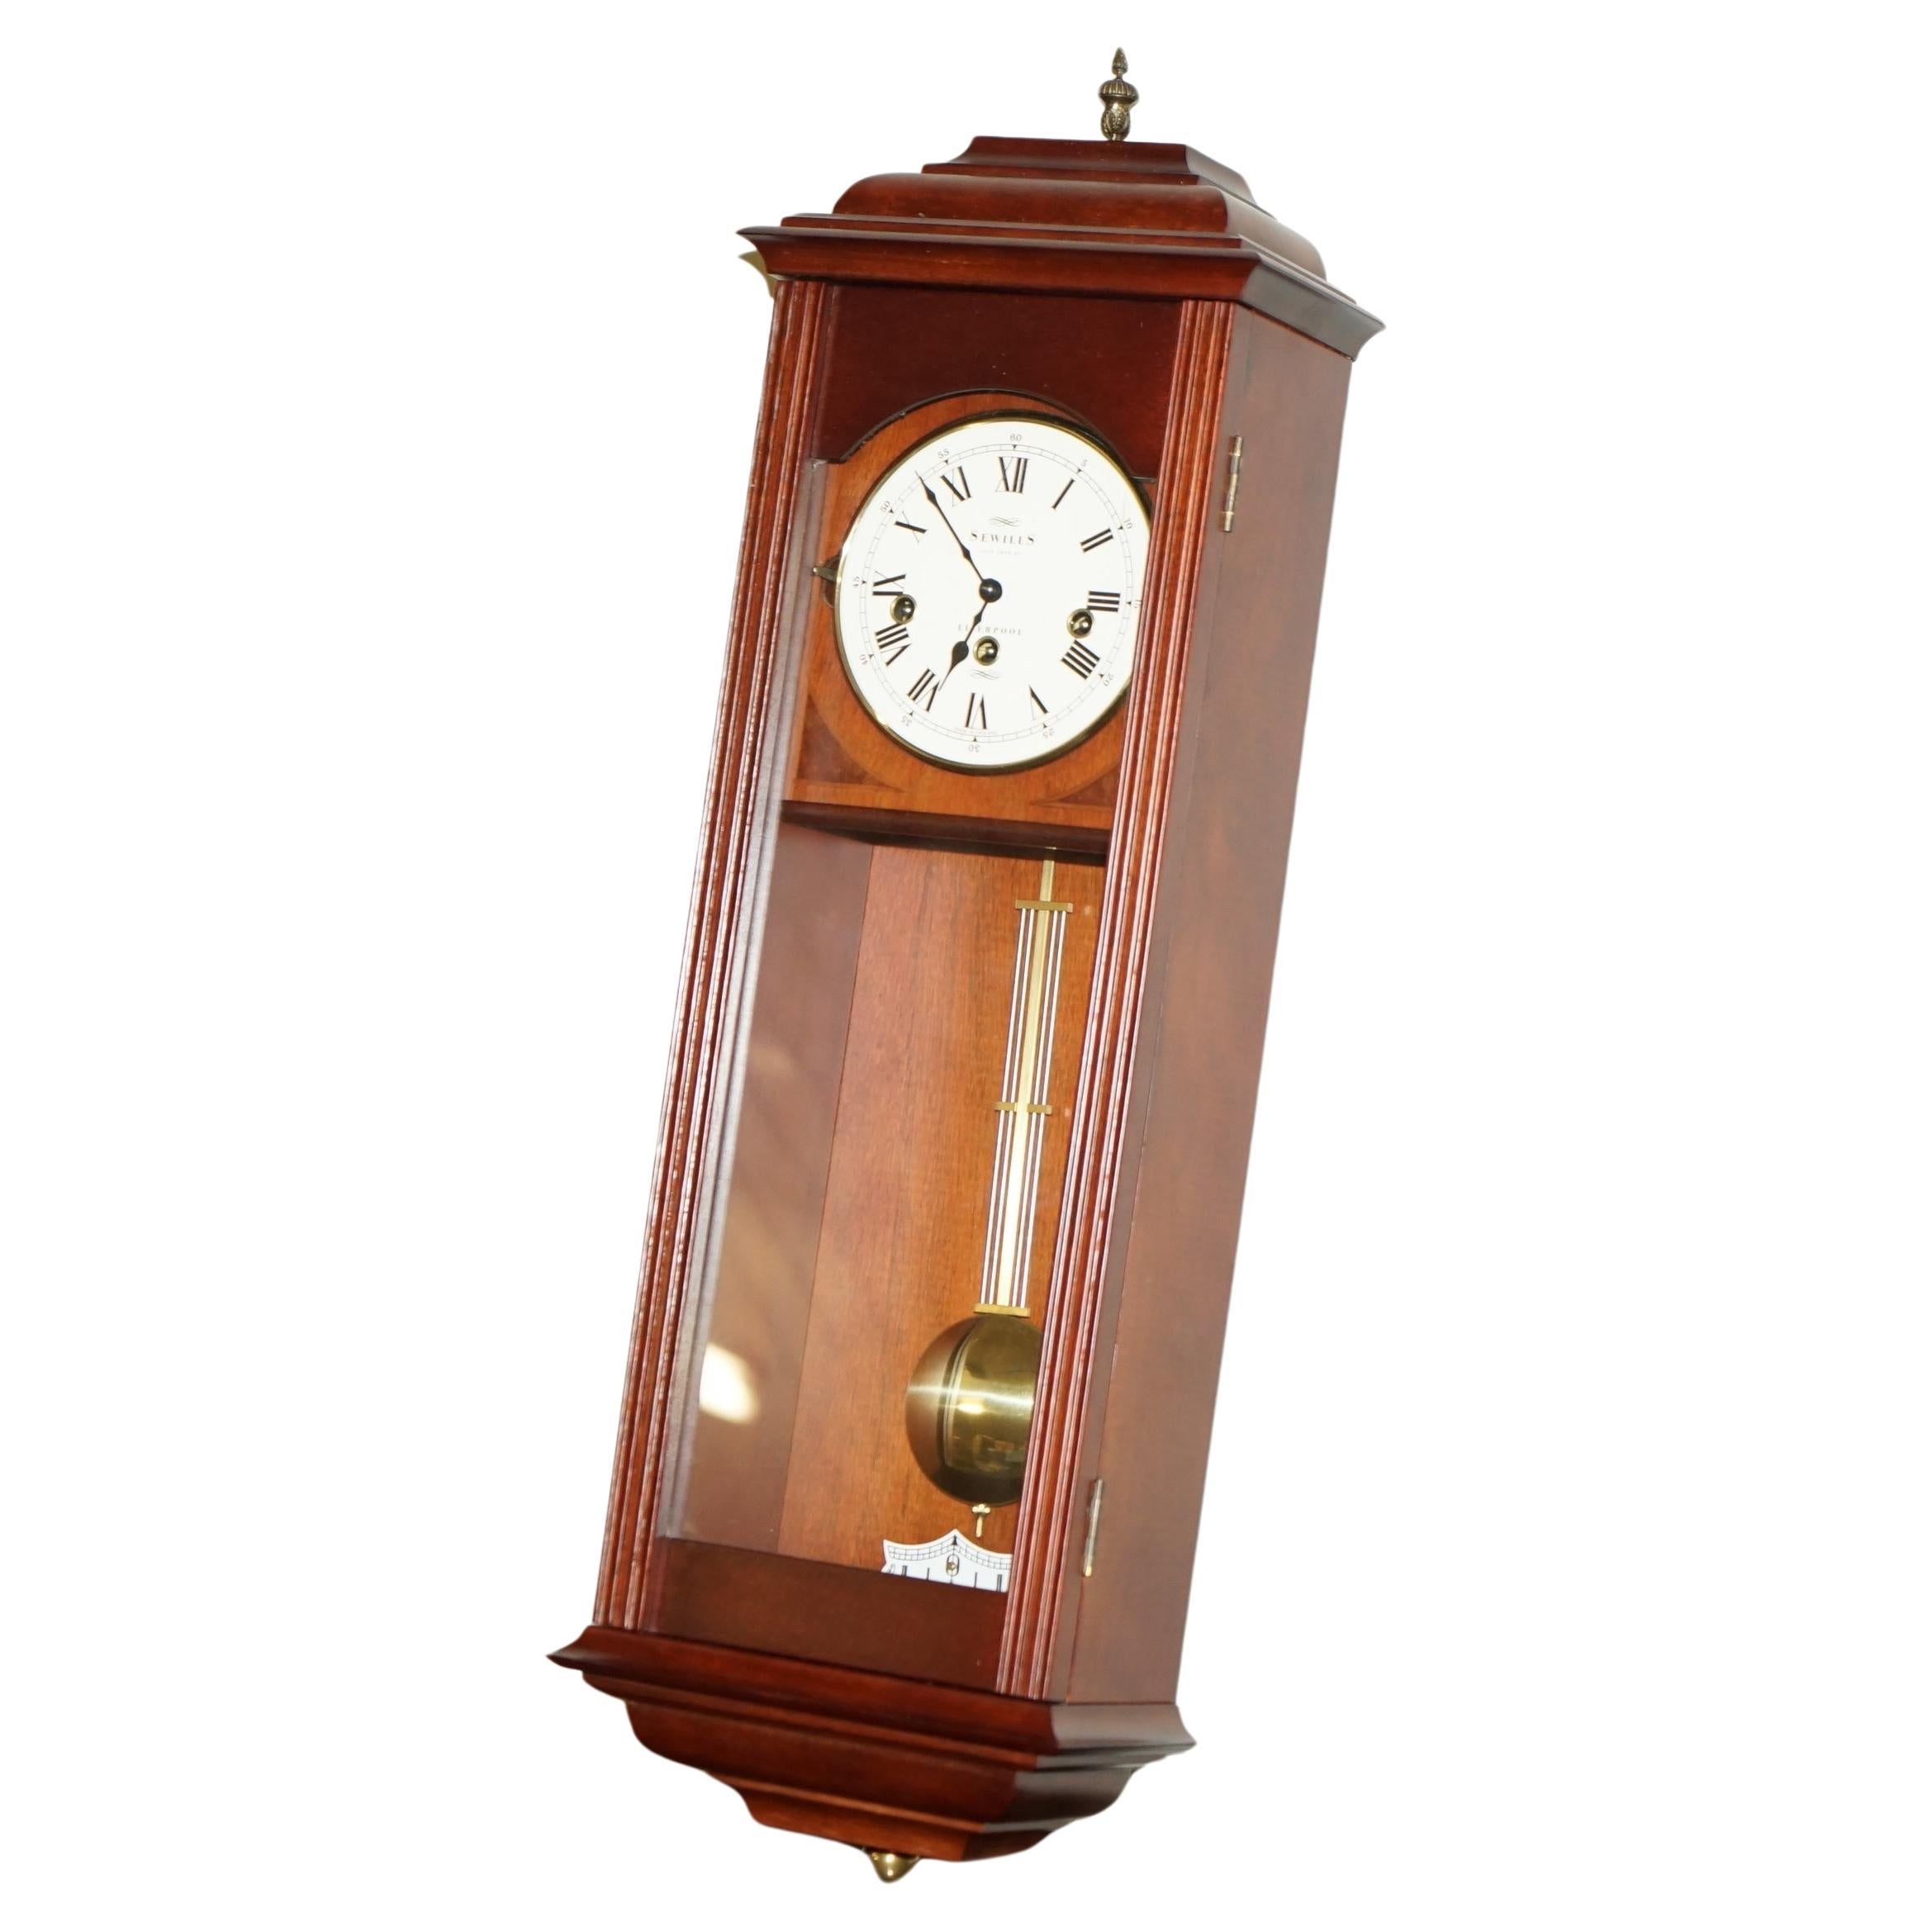 VINTAGE SEWILLS EST 1800 LIVERPOOL LONGCASE WALL CLOCK WiTH WESTMINSTER CHIME